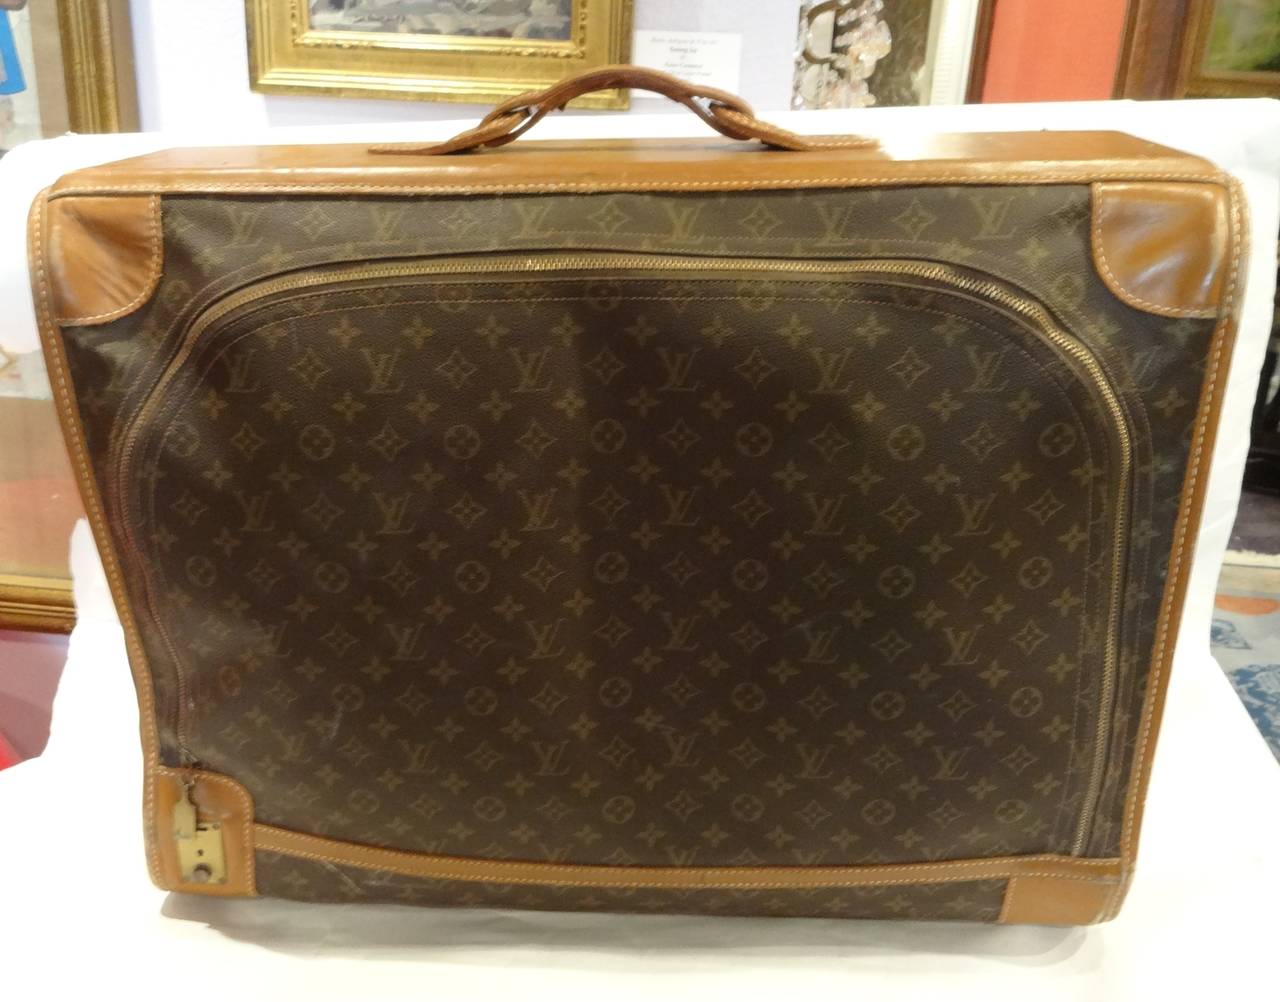 A vintage Louis Vuitton leather monogrammed suitcase/luggage with key